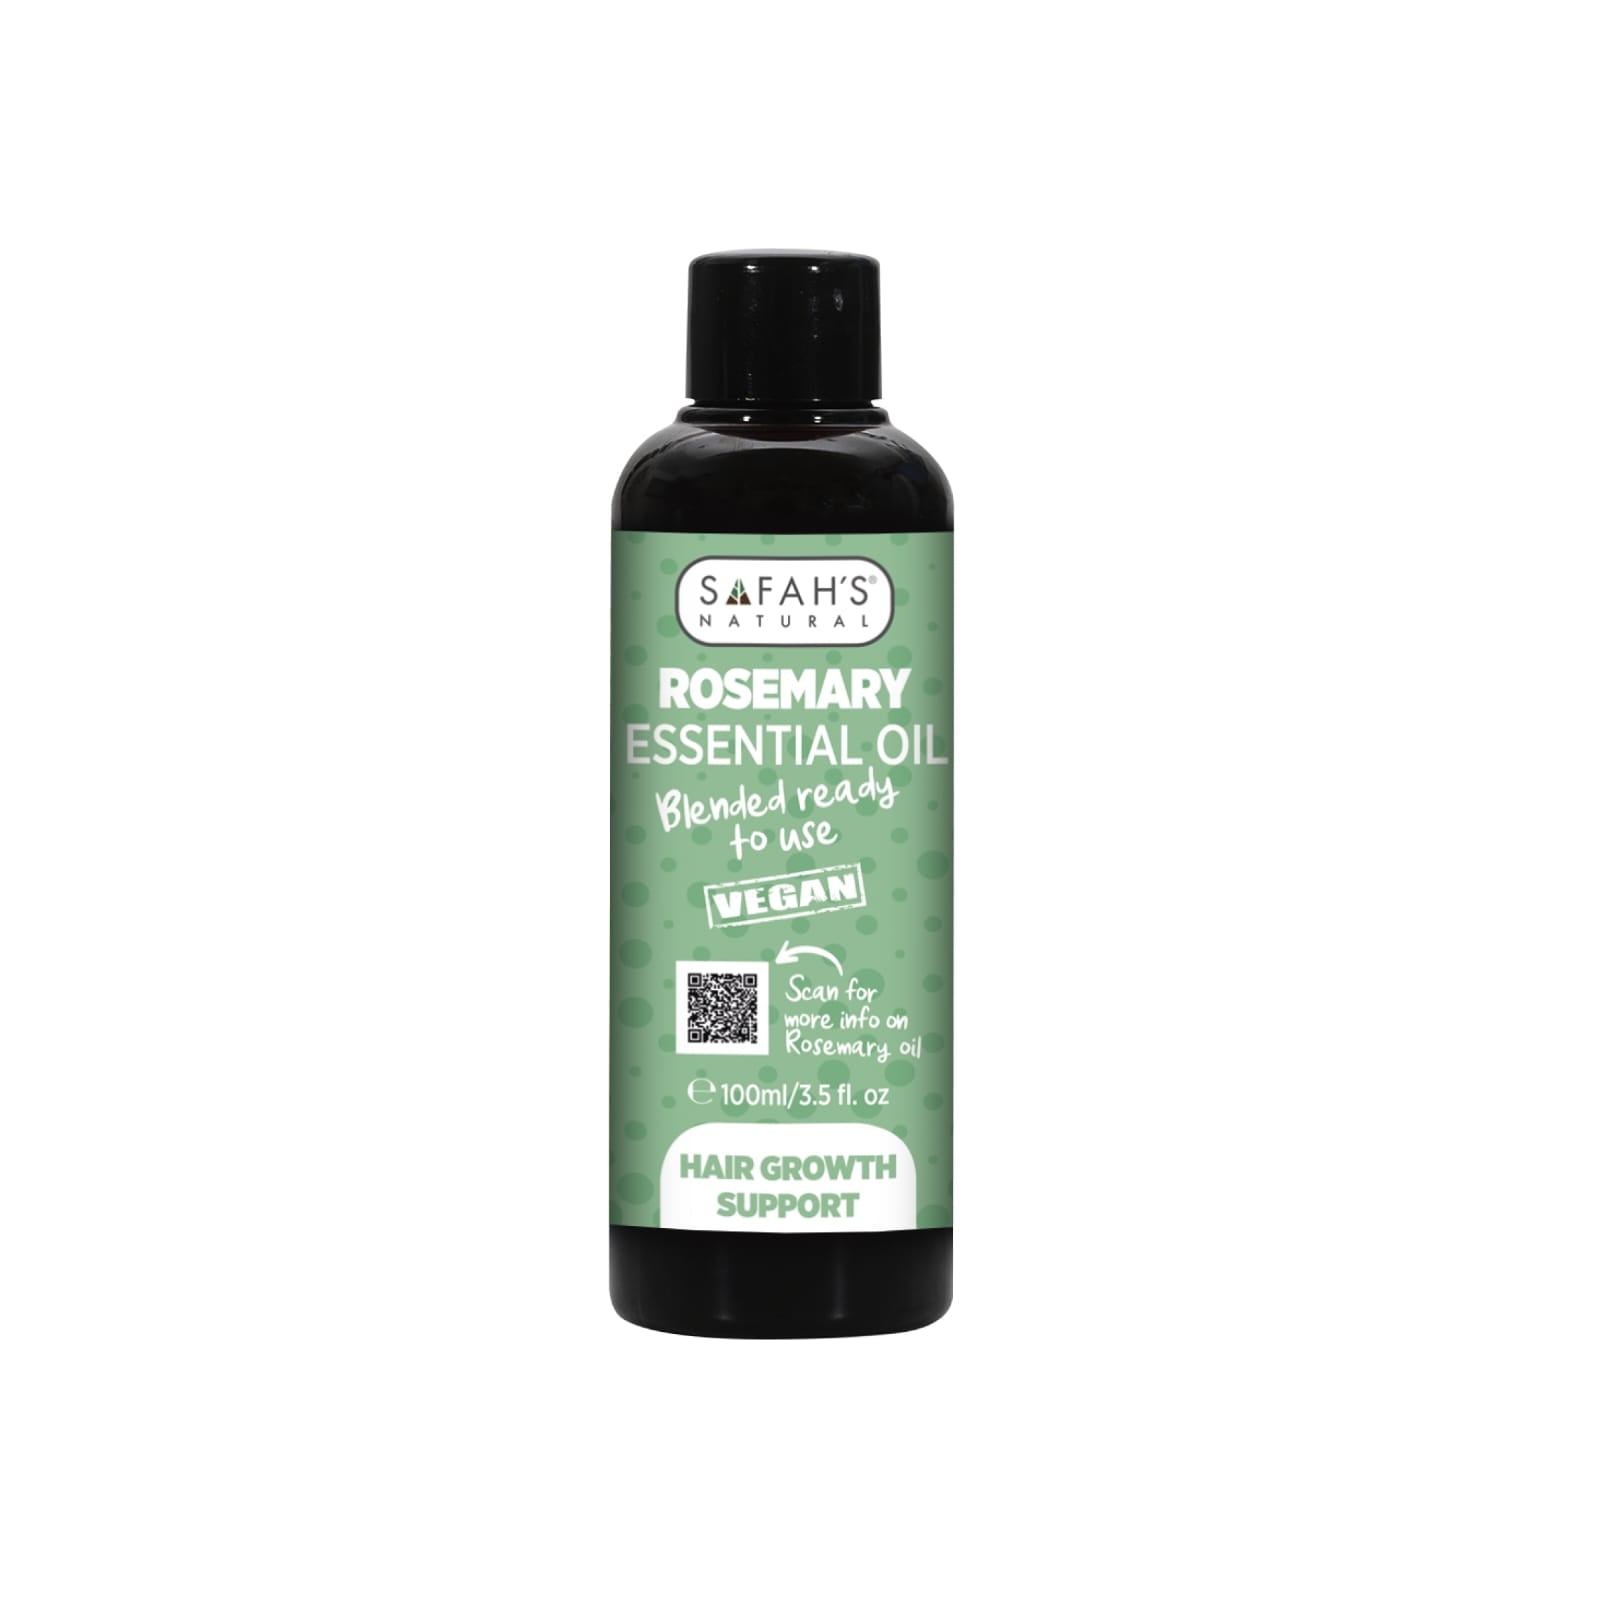 Blended Rosemary Essential Oil - Perfect Harmony for Aromatherapy, Skin, and Hair Revitalization